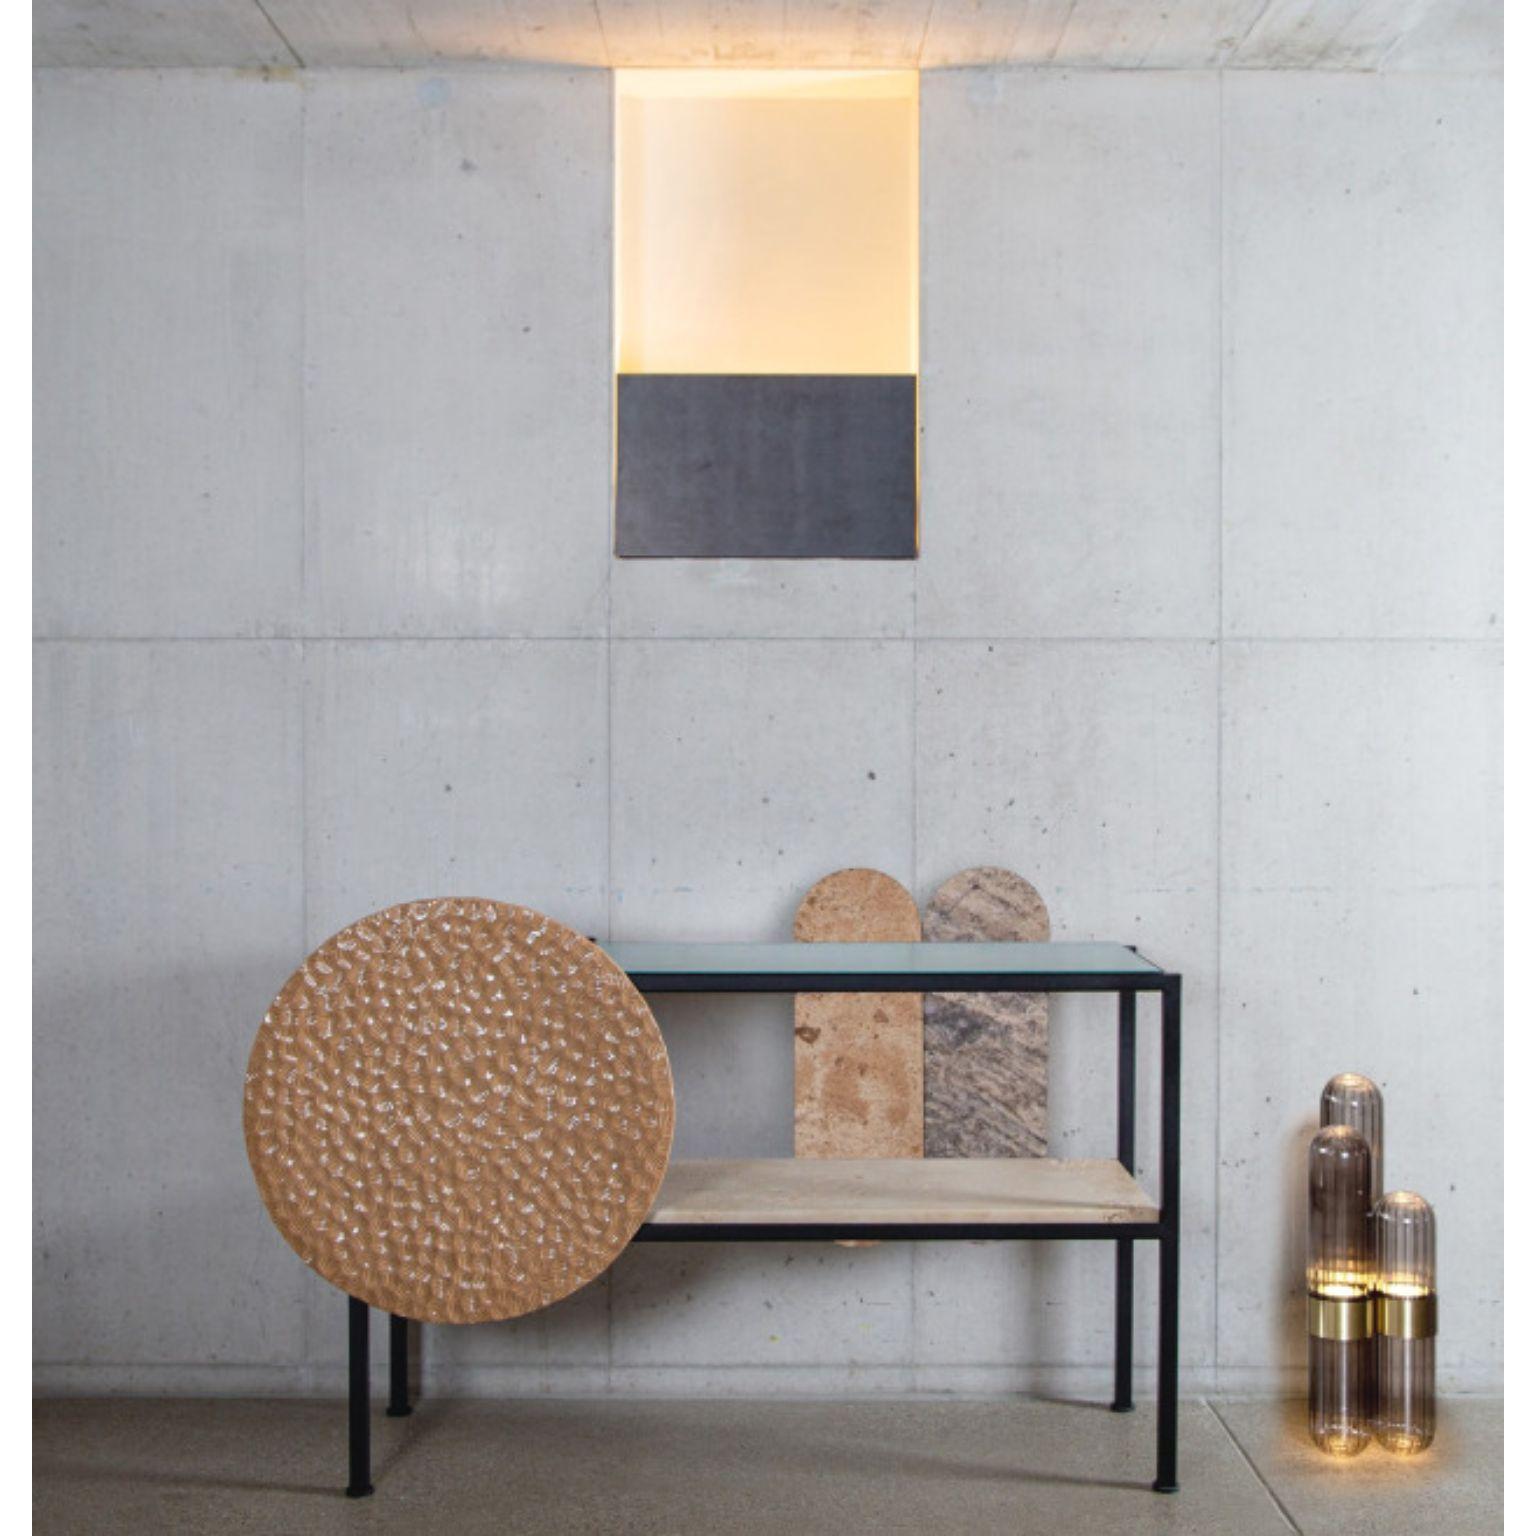 Collage Travertino Classico Terracotta Console Table by Pulpo
Design by Sylvain Willenz
Dimensions: D 38 x W 12 x H 87 cm.
Materials: Ceramic, Textured Glass, Marble, Travertine and Steel.
Variations available. Please contact us 

Pulpo is a design